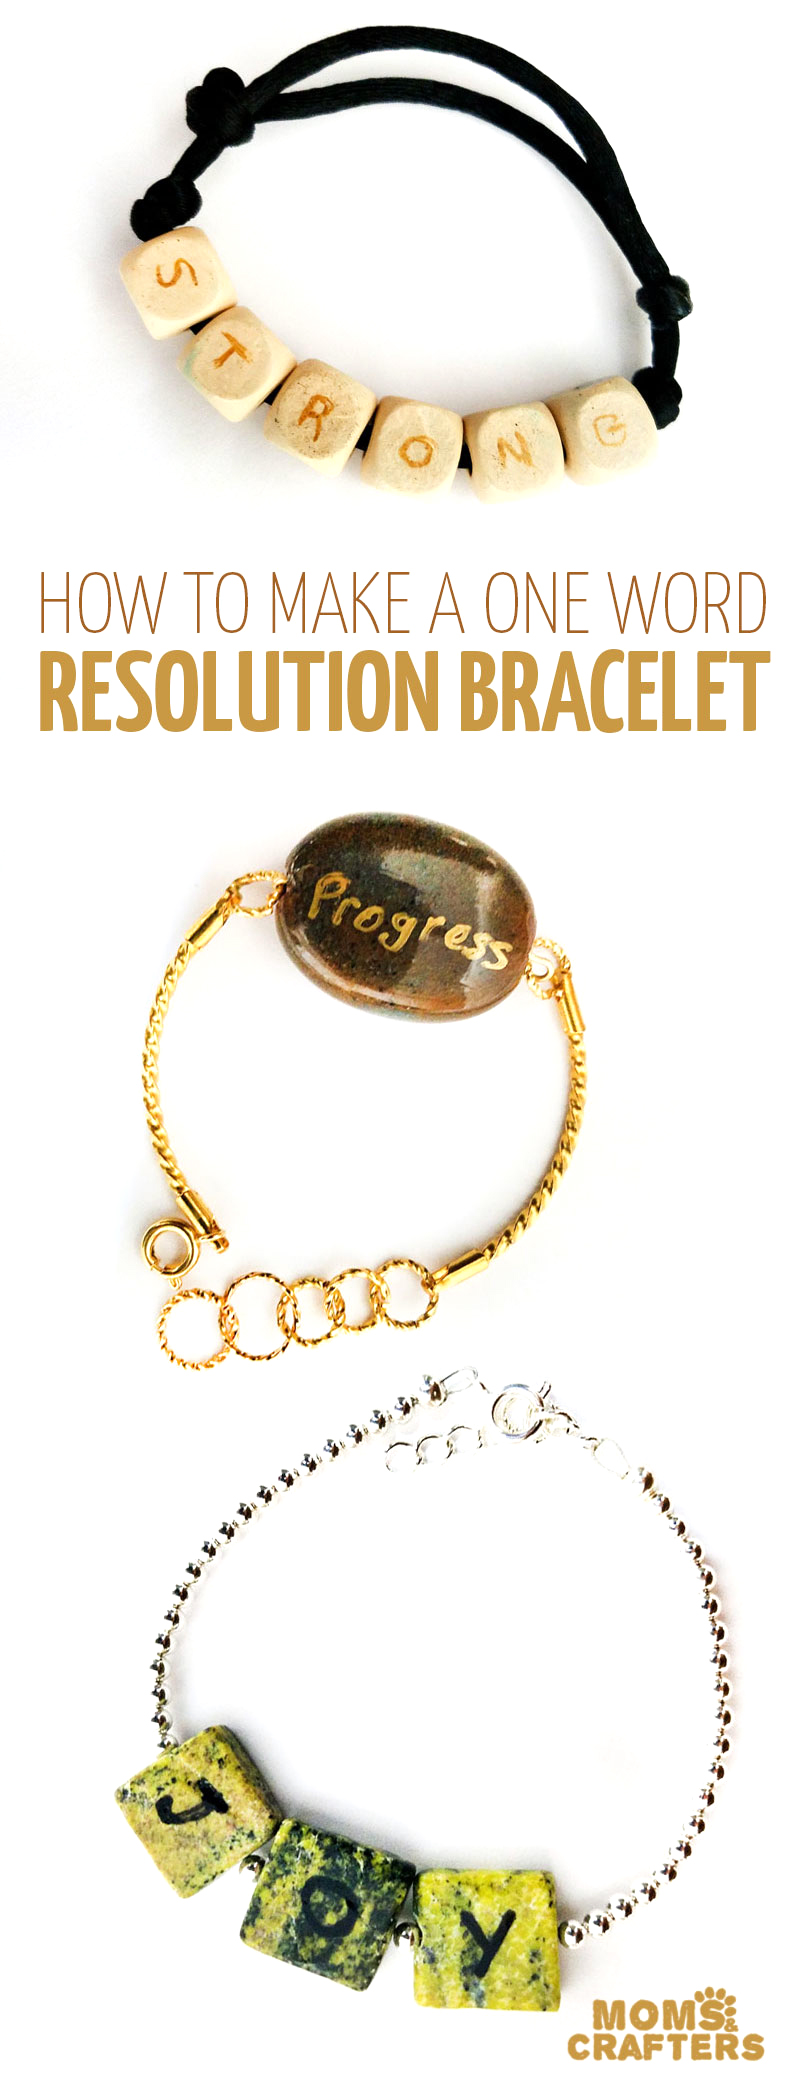 This is the best tip for sticking to New Year's resolutions - make one word resolution bracelets to keep it in sight all year! These are really pretty and easy DIY bracelets to make, great for beginning jewelry making or advanced. Tutorials for all of these one-word resolution bracelets included.